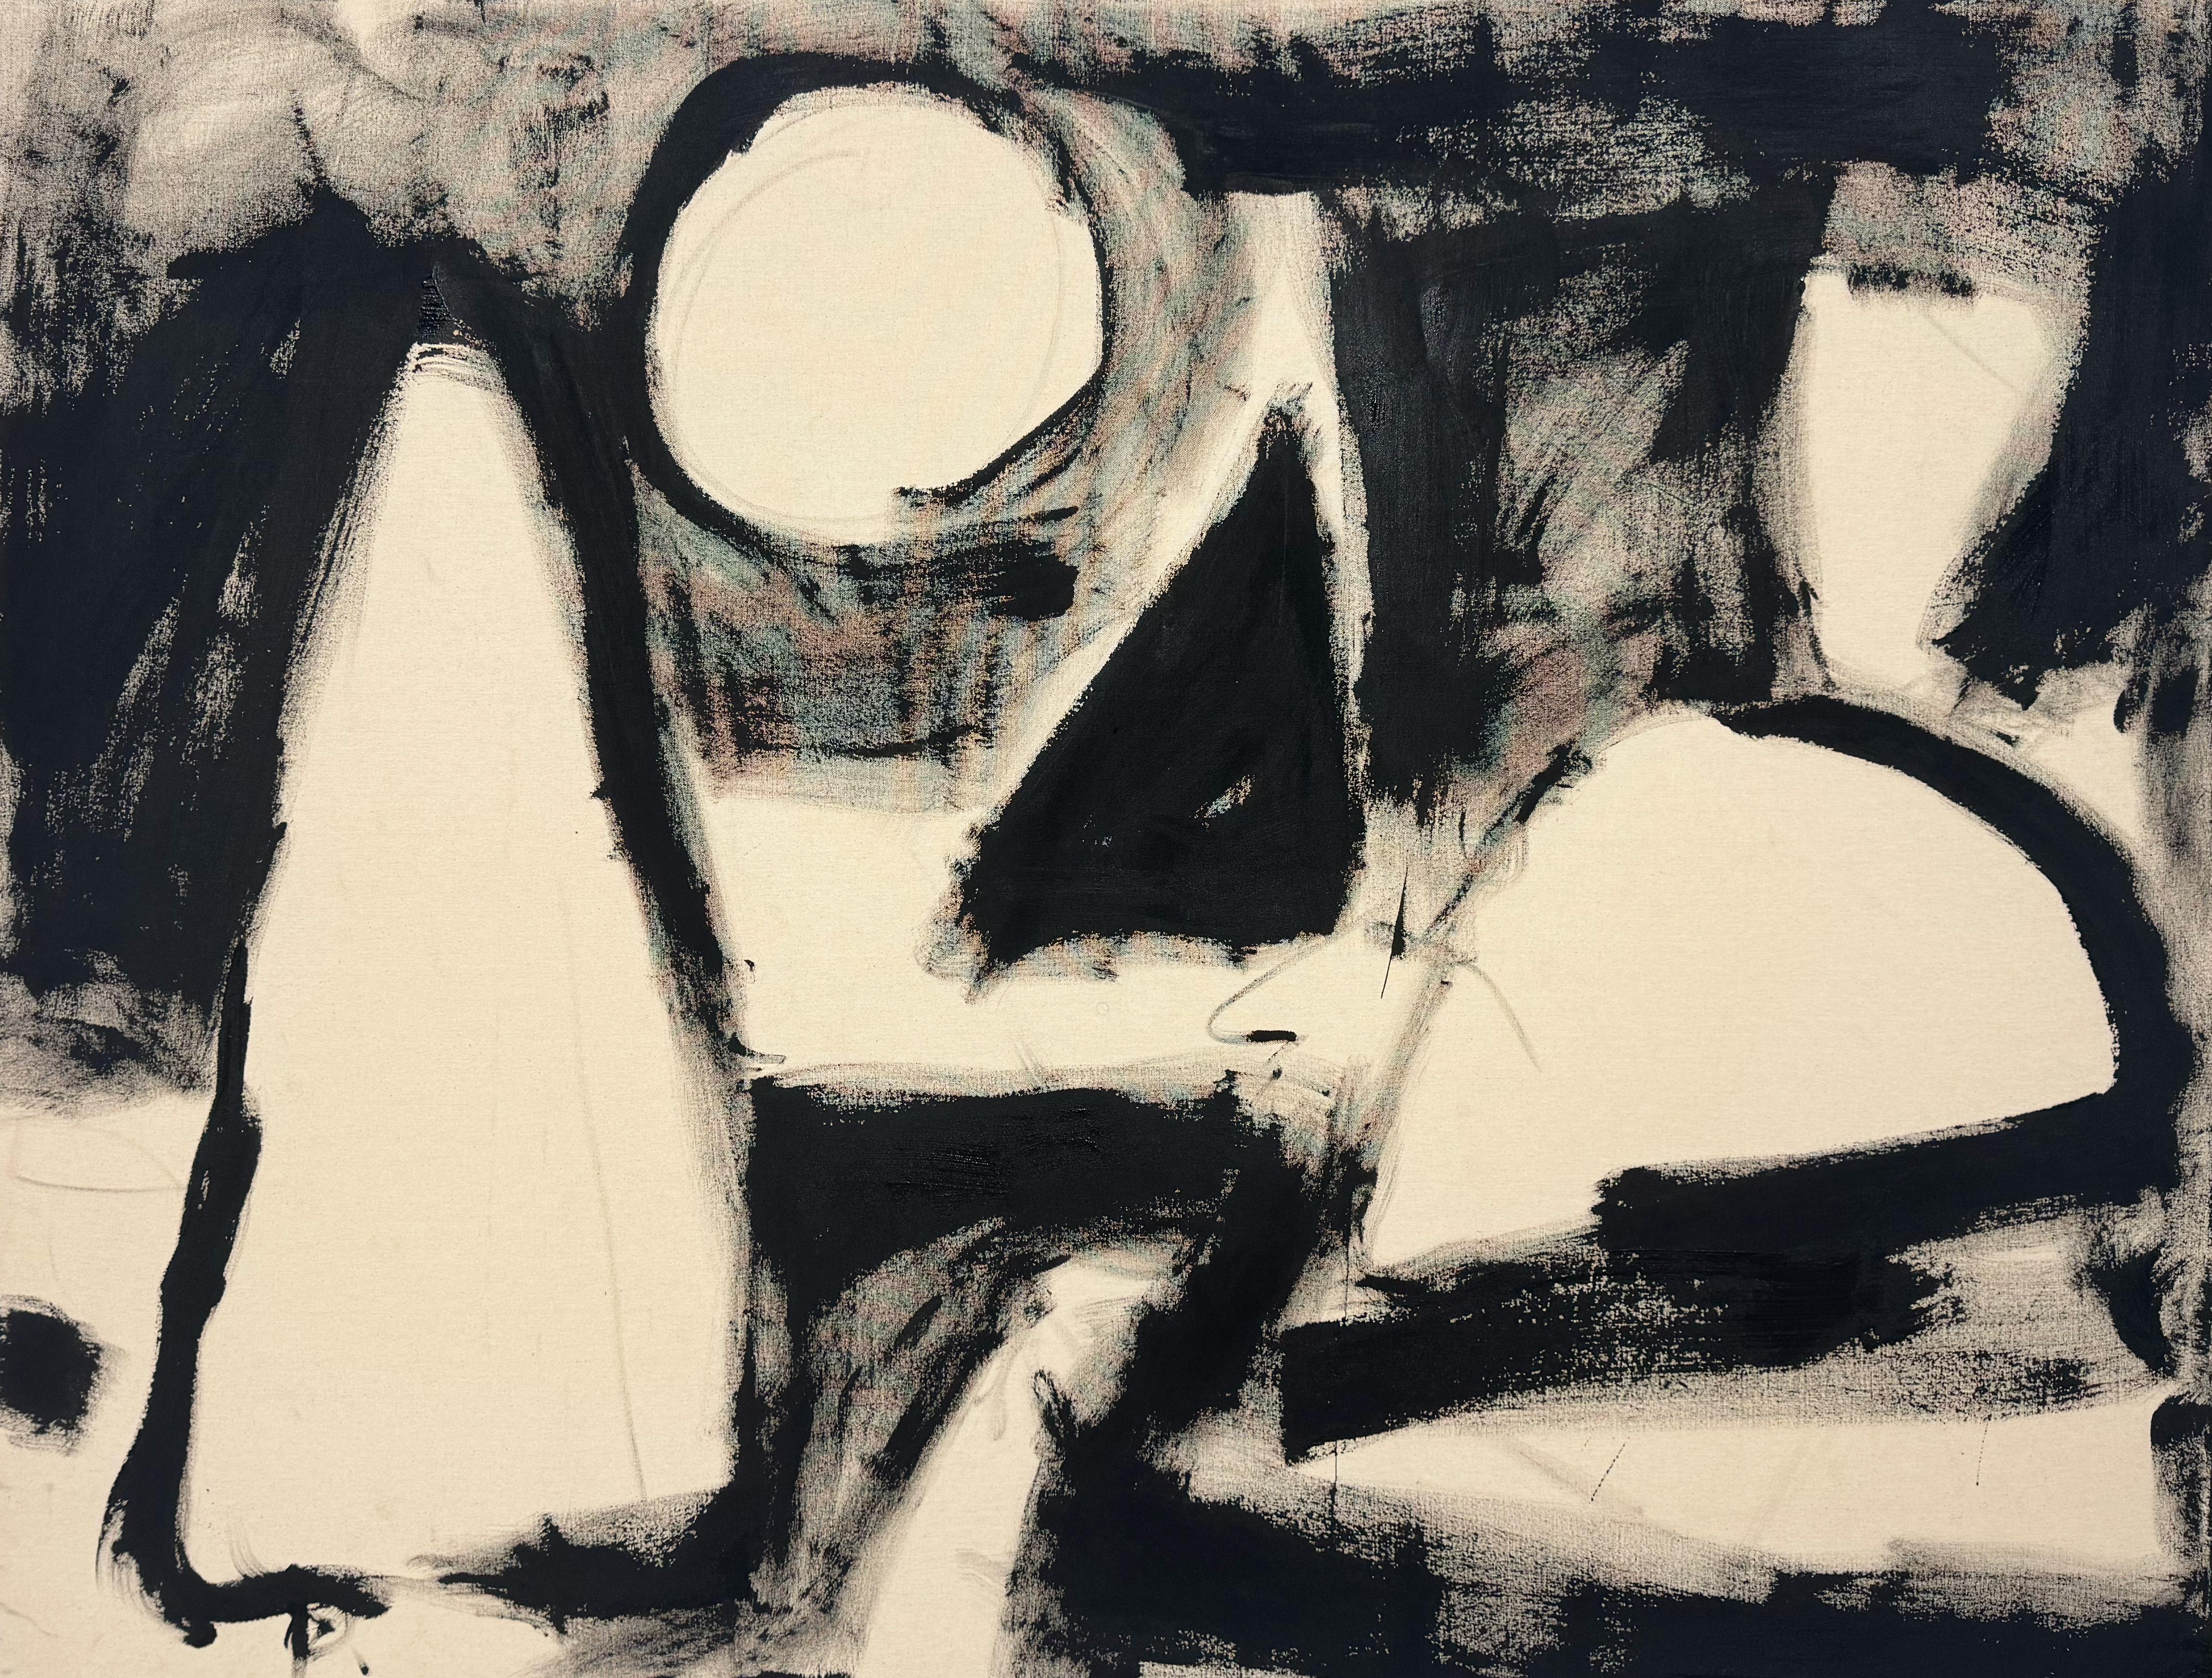 This painting was created using acrylic paint on raw canvas. The washy moments of paint create variations of black and grey tones and texture. The bold geometric shapes loosely reference elements from the landscape while still remaining abstract.